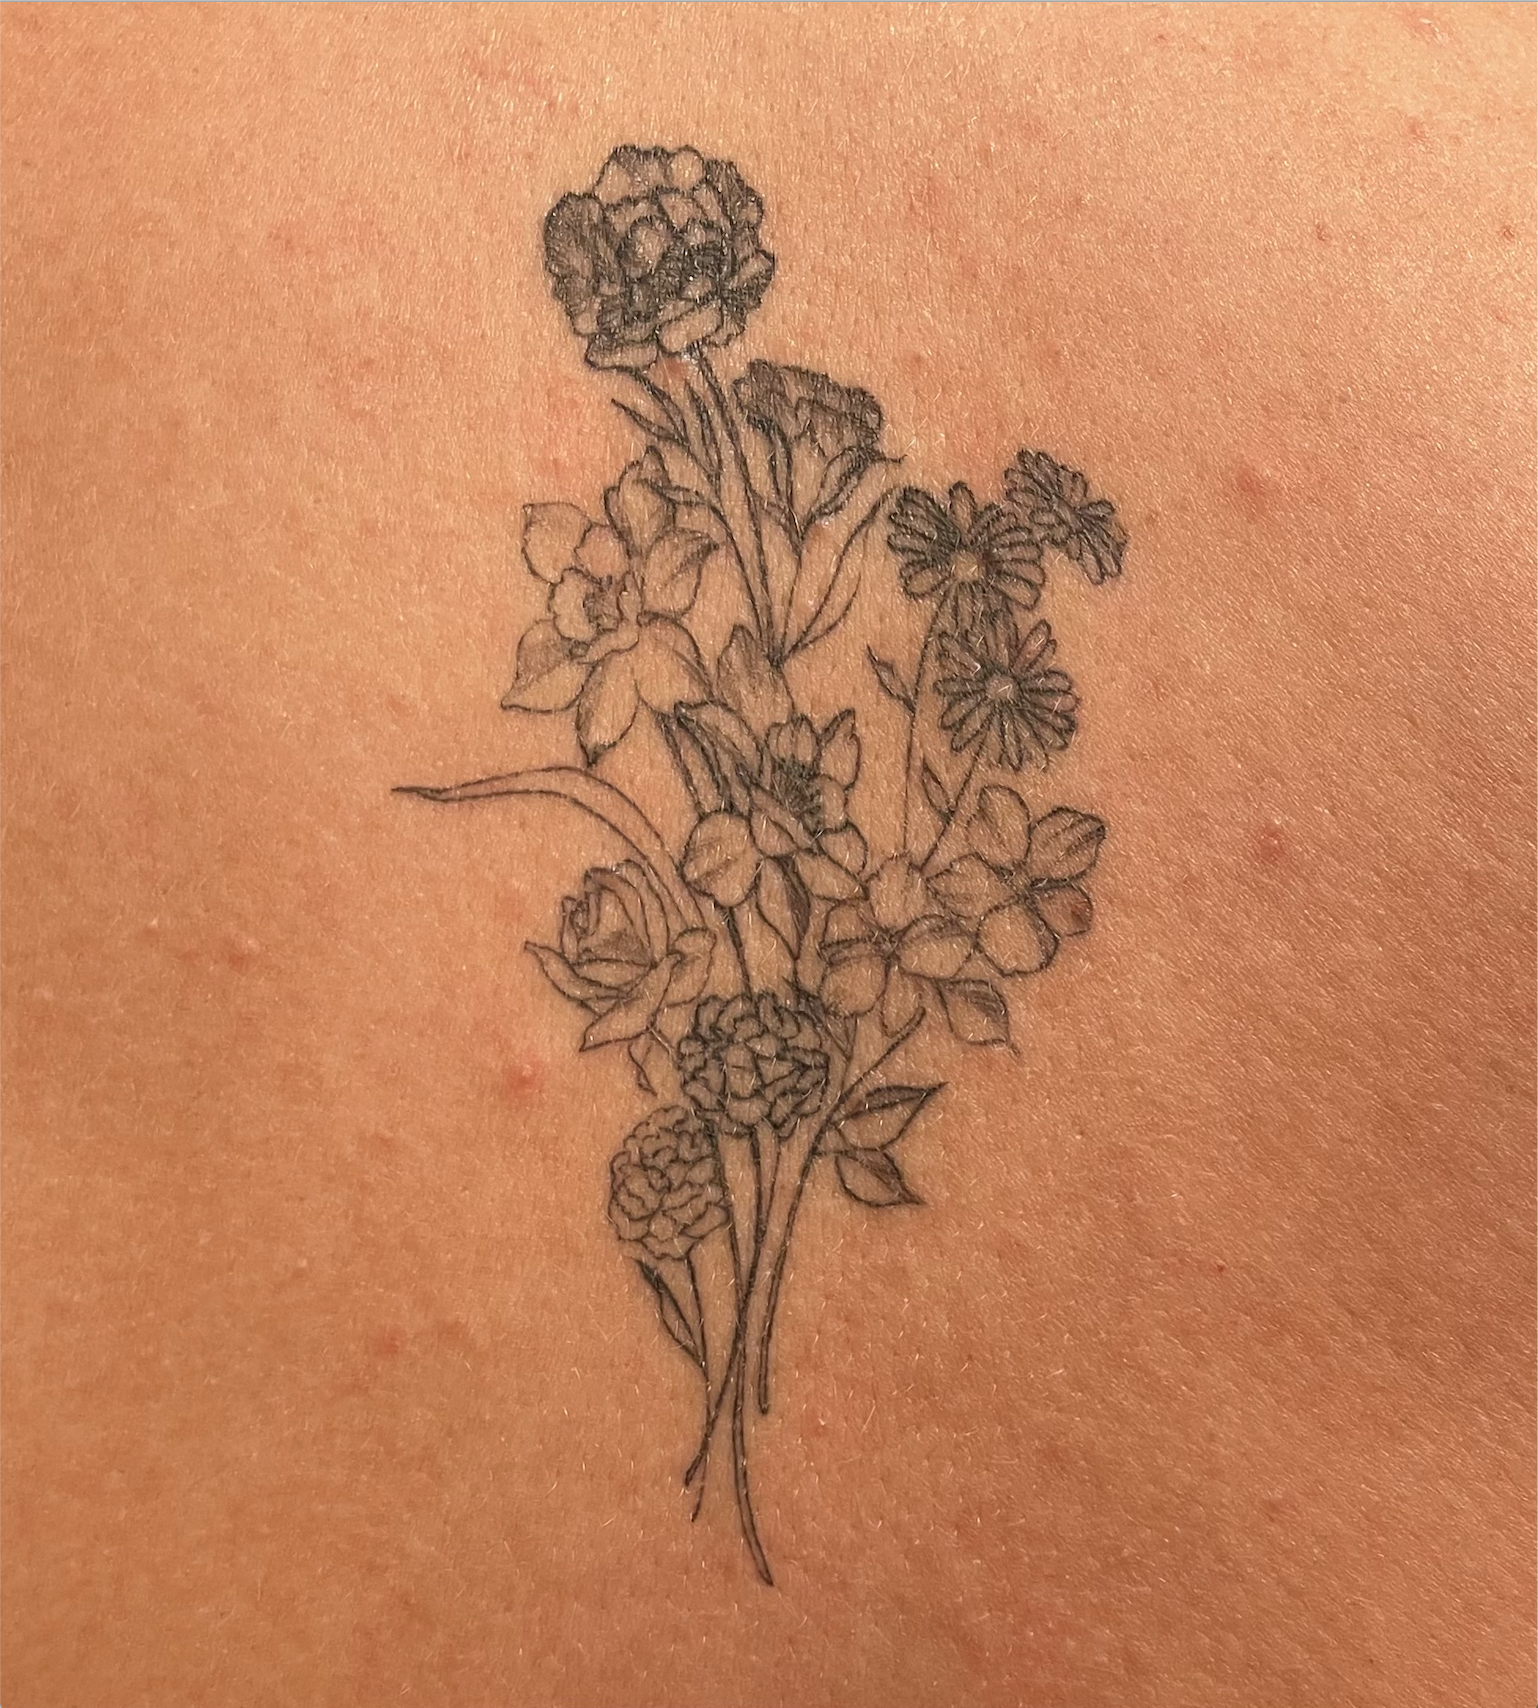 34 Popular Flower Tattoos Meanings and Designs  Help You Choose The R   neartattoos